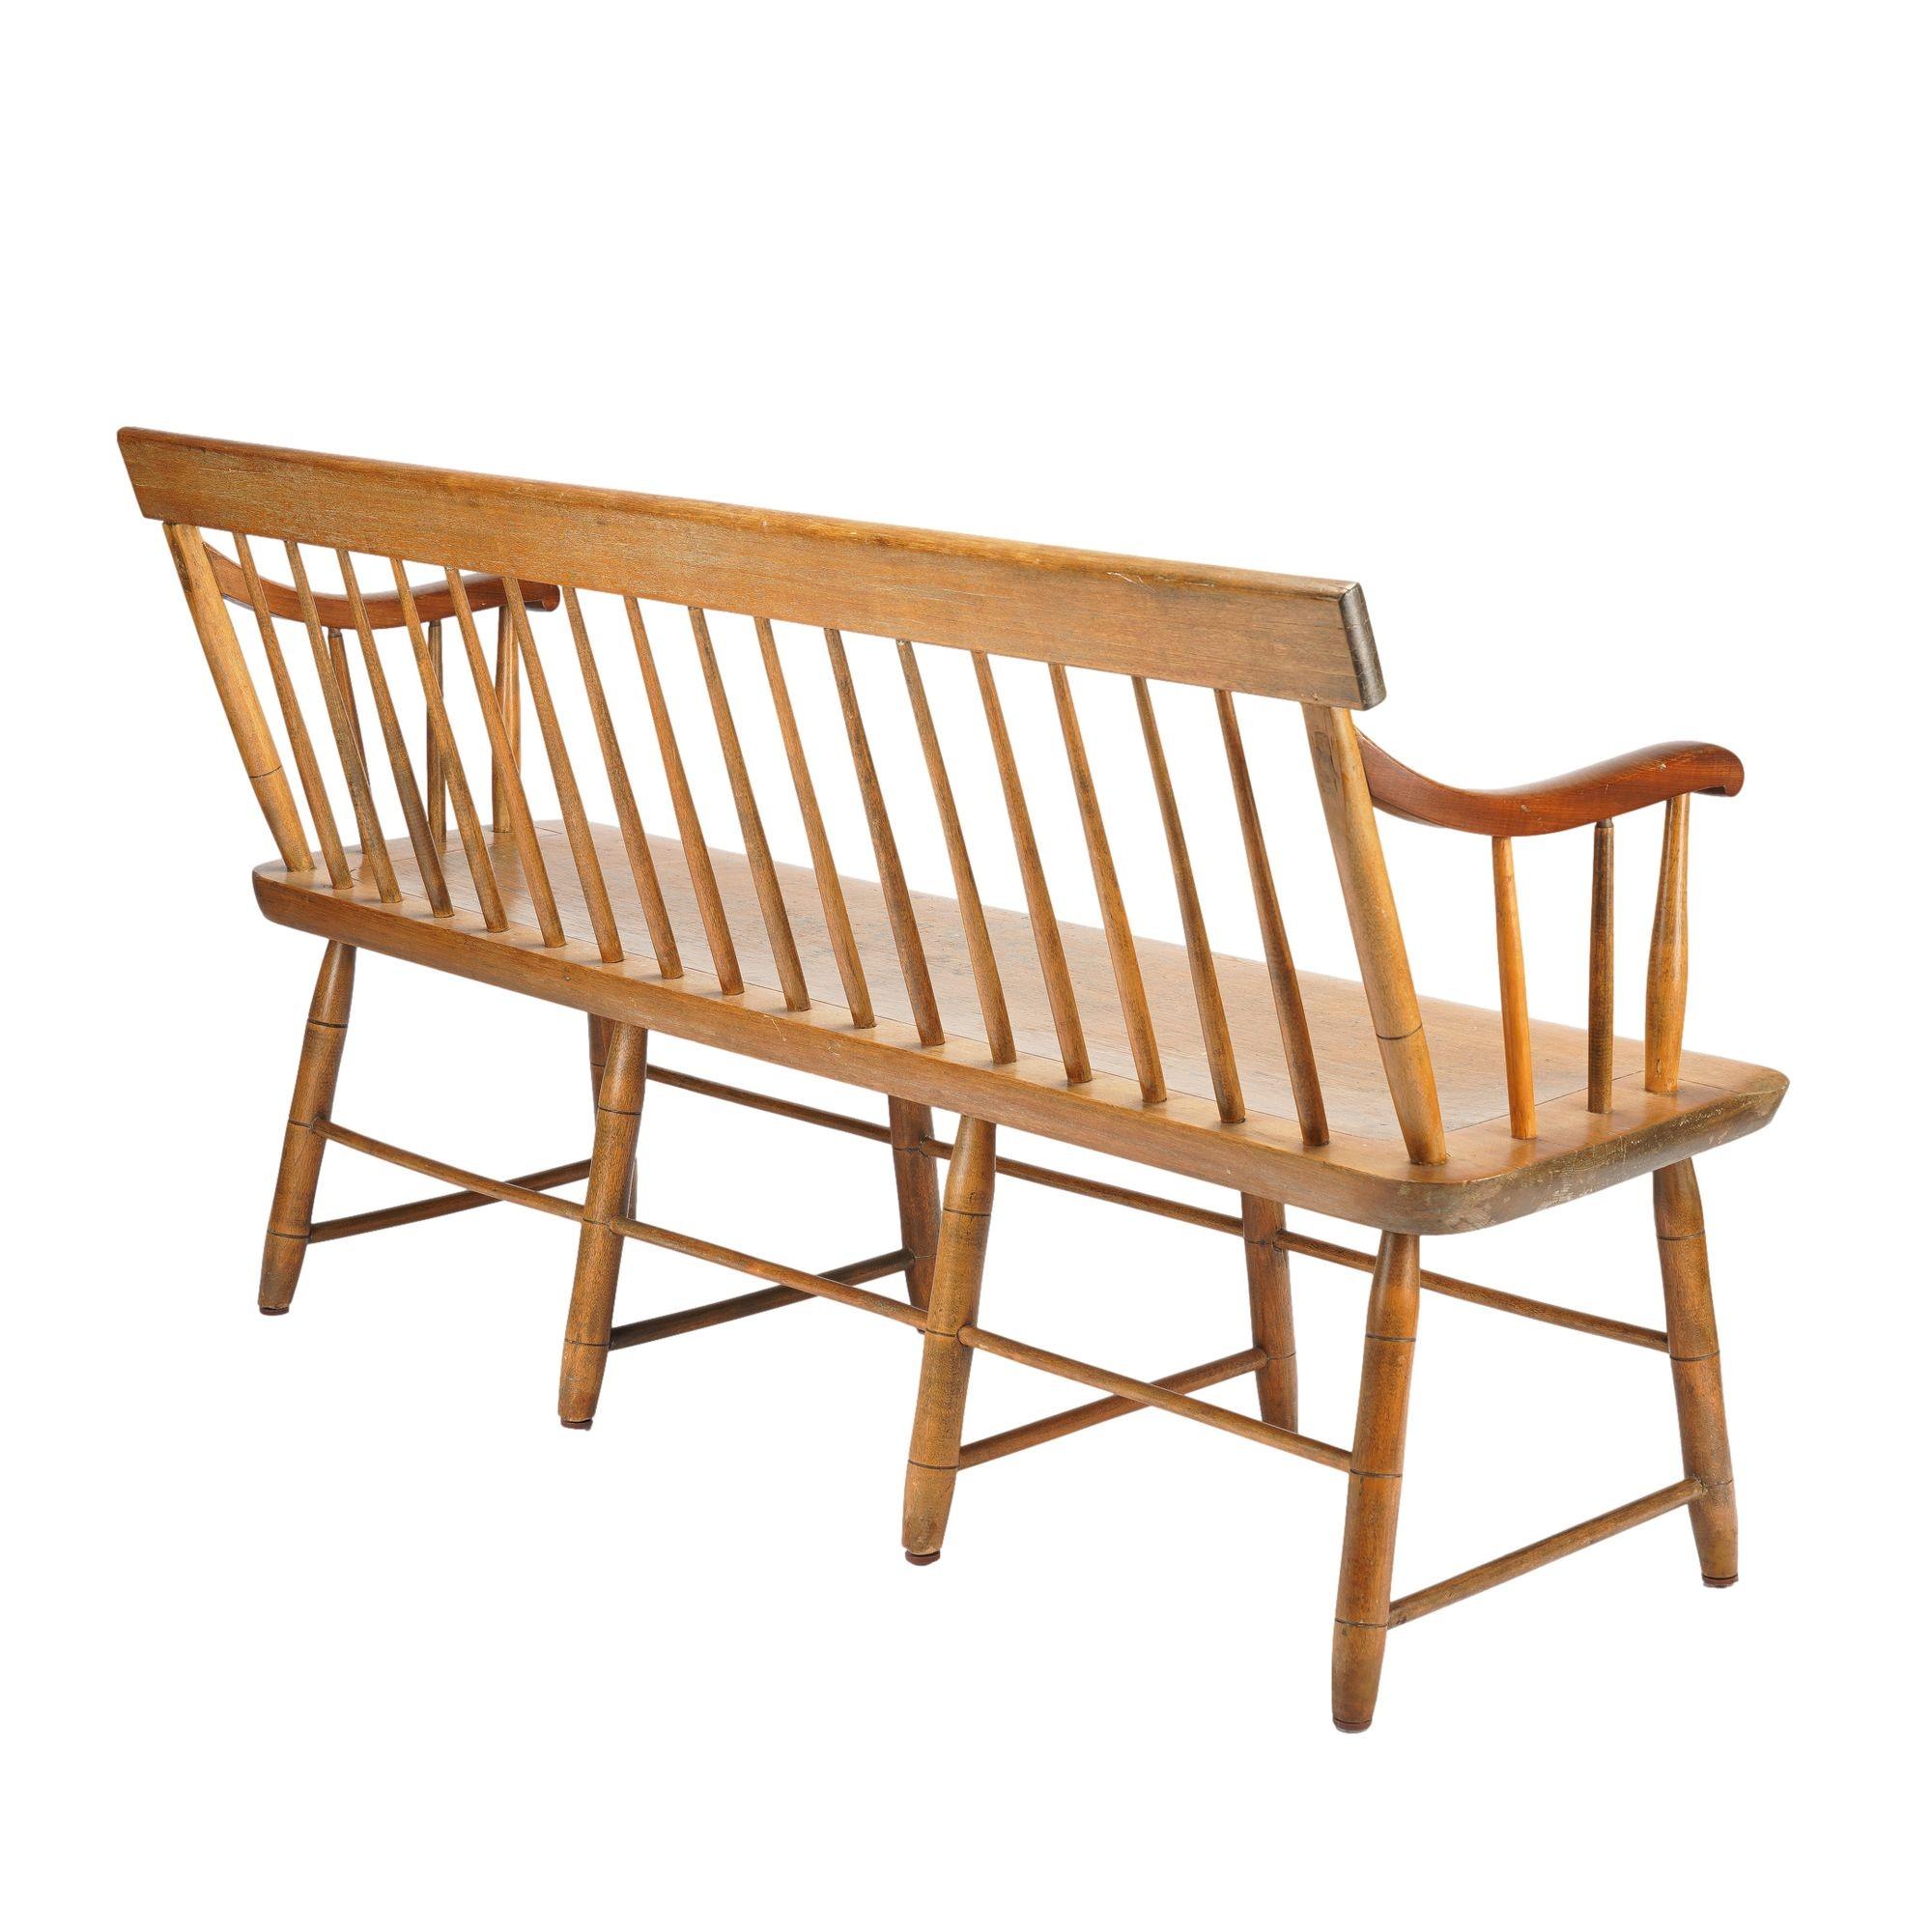 Birch American Windsor bench, c. 1830 For Sale